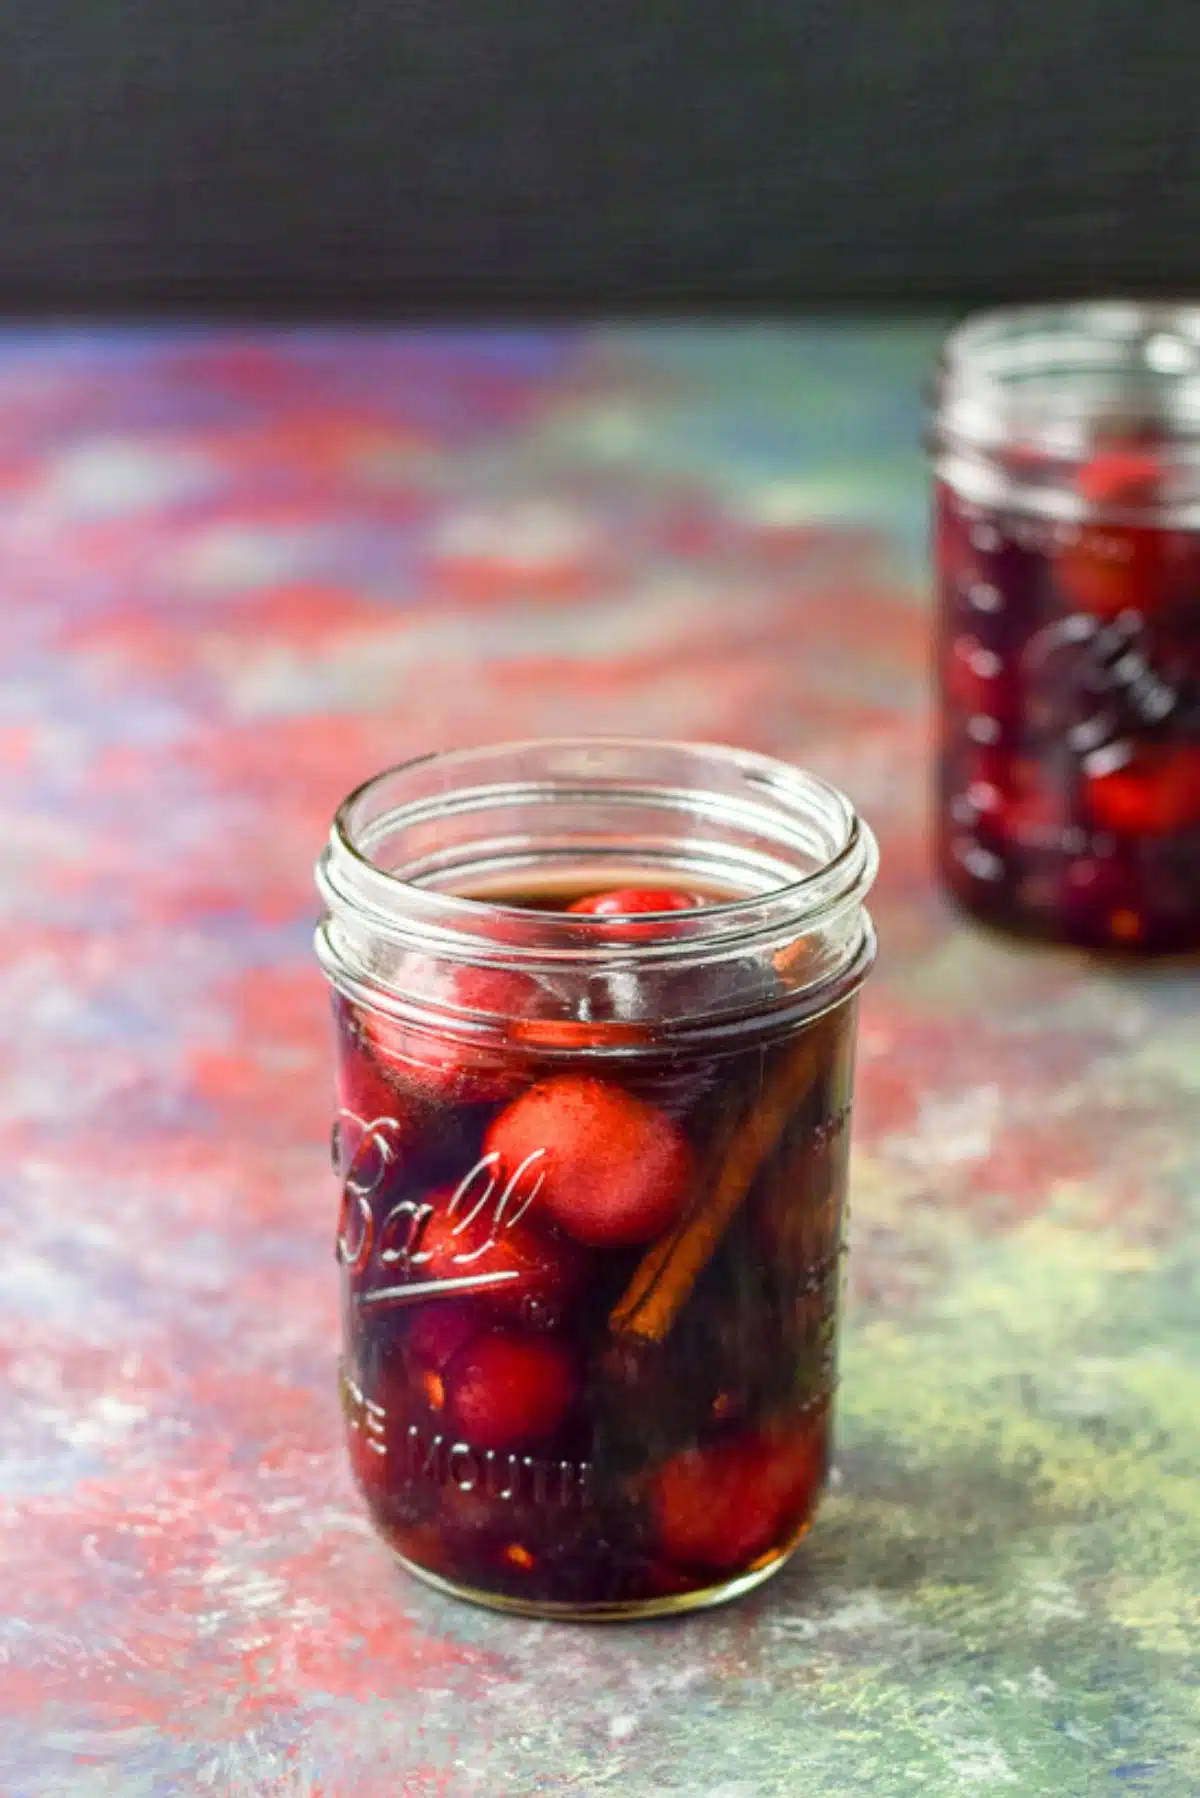 Cherries and cinnamon in bourbon in two jars on a table